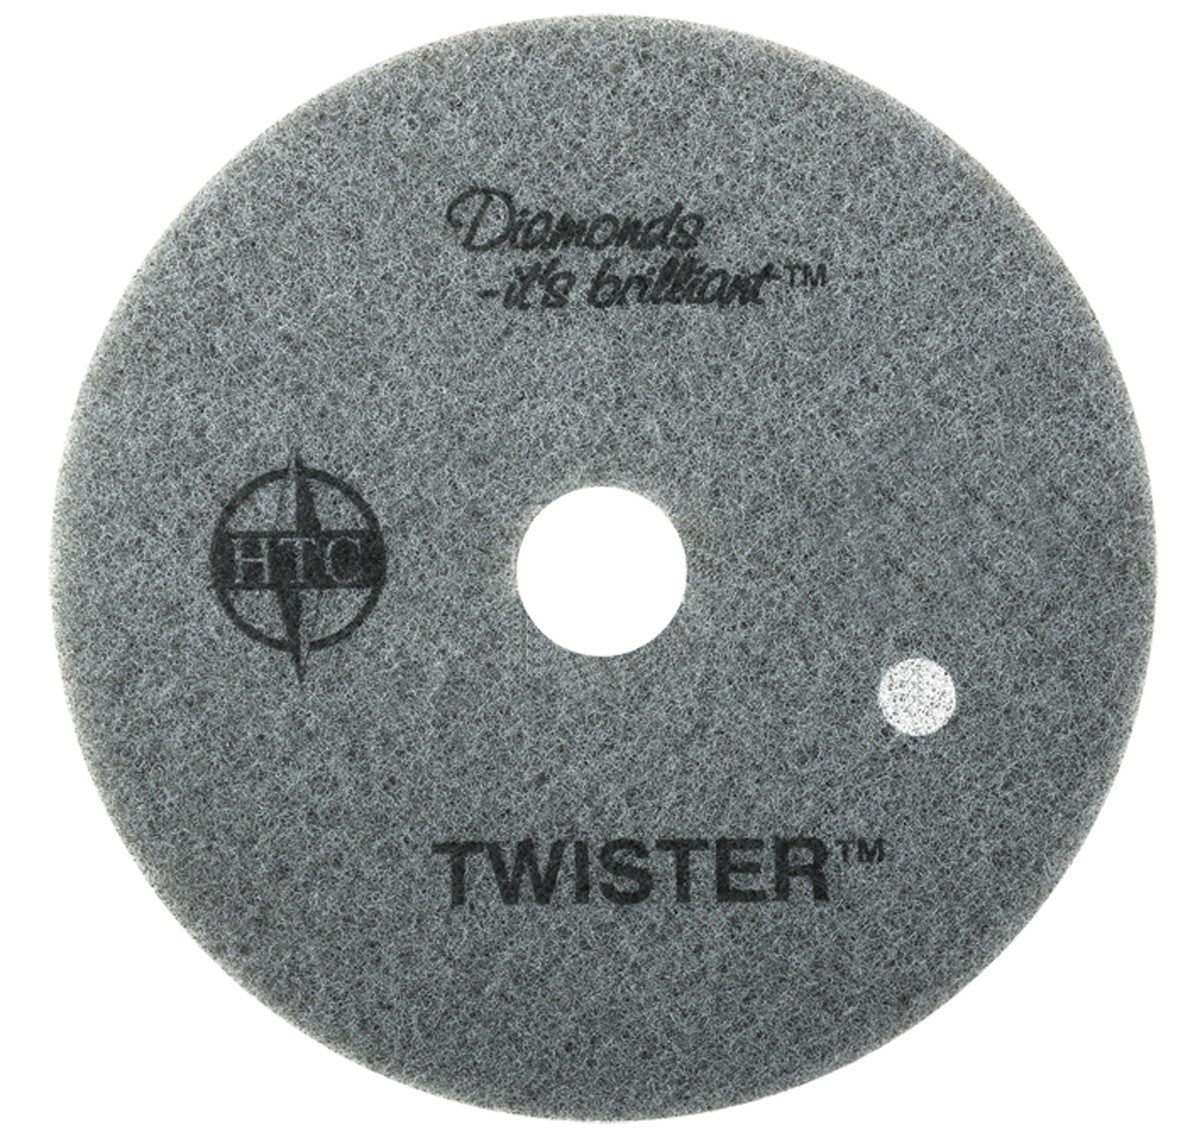 Twister Diamond Cleaning System 27